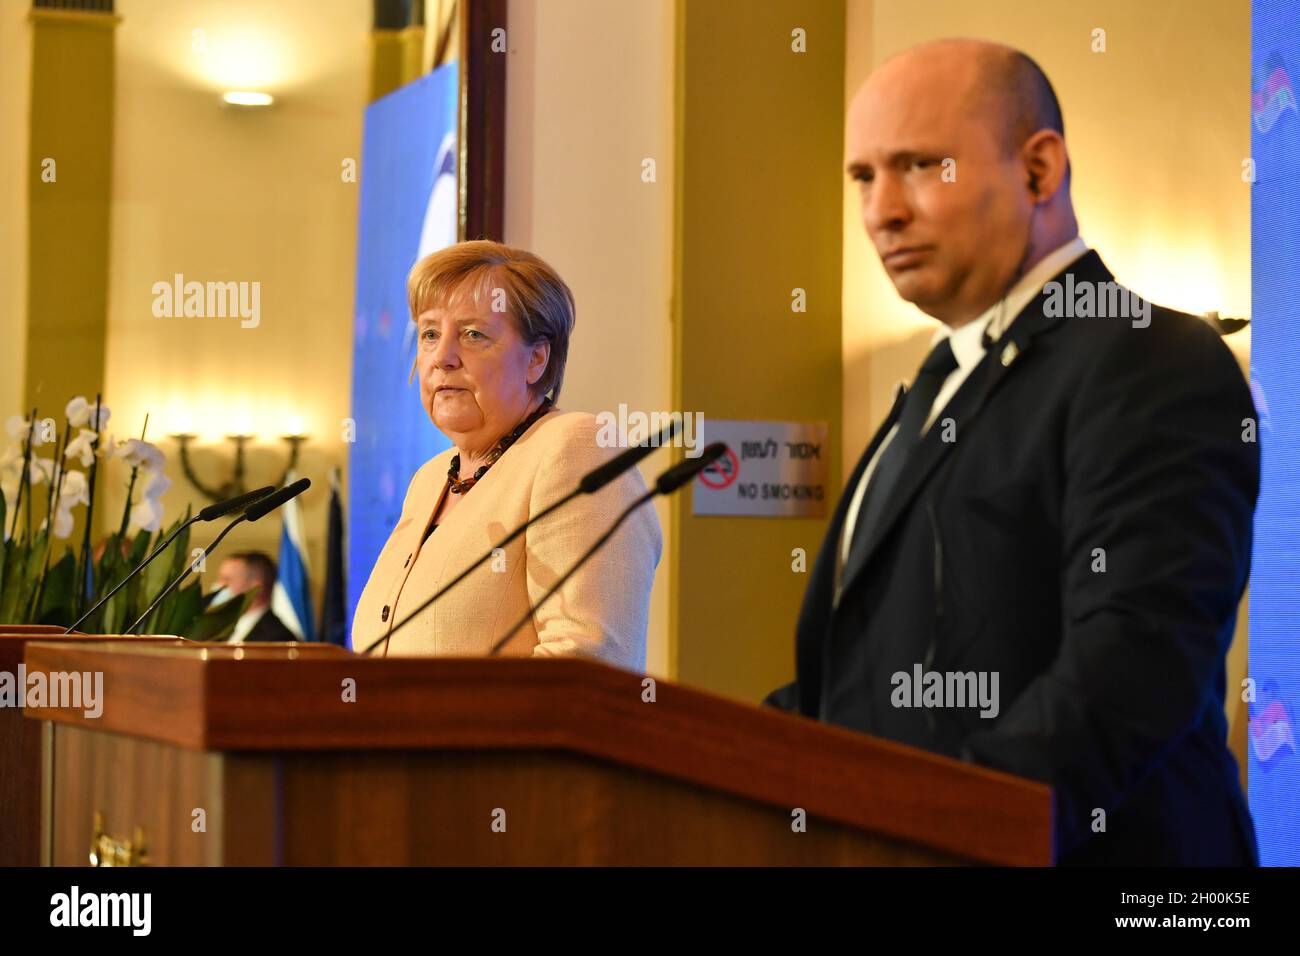 Jerusalem. 10th Oct, 2021. Israeli Prime Minister Naftali Bennett (R) and German Chancellor Angela Merkel attend a joint press conference at the King David Hotel in Jerusalem, Oct. 10, 2021. Germany's outgoing Chancellor Angela Merkel kick-started her visit to Israel on Sunday morning, marking her final official trip to the country before she leaves office. Credit: Yoav Dudkevitch/JINI via Xinhua/Alamy Live News Stock Photo